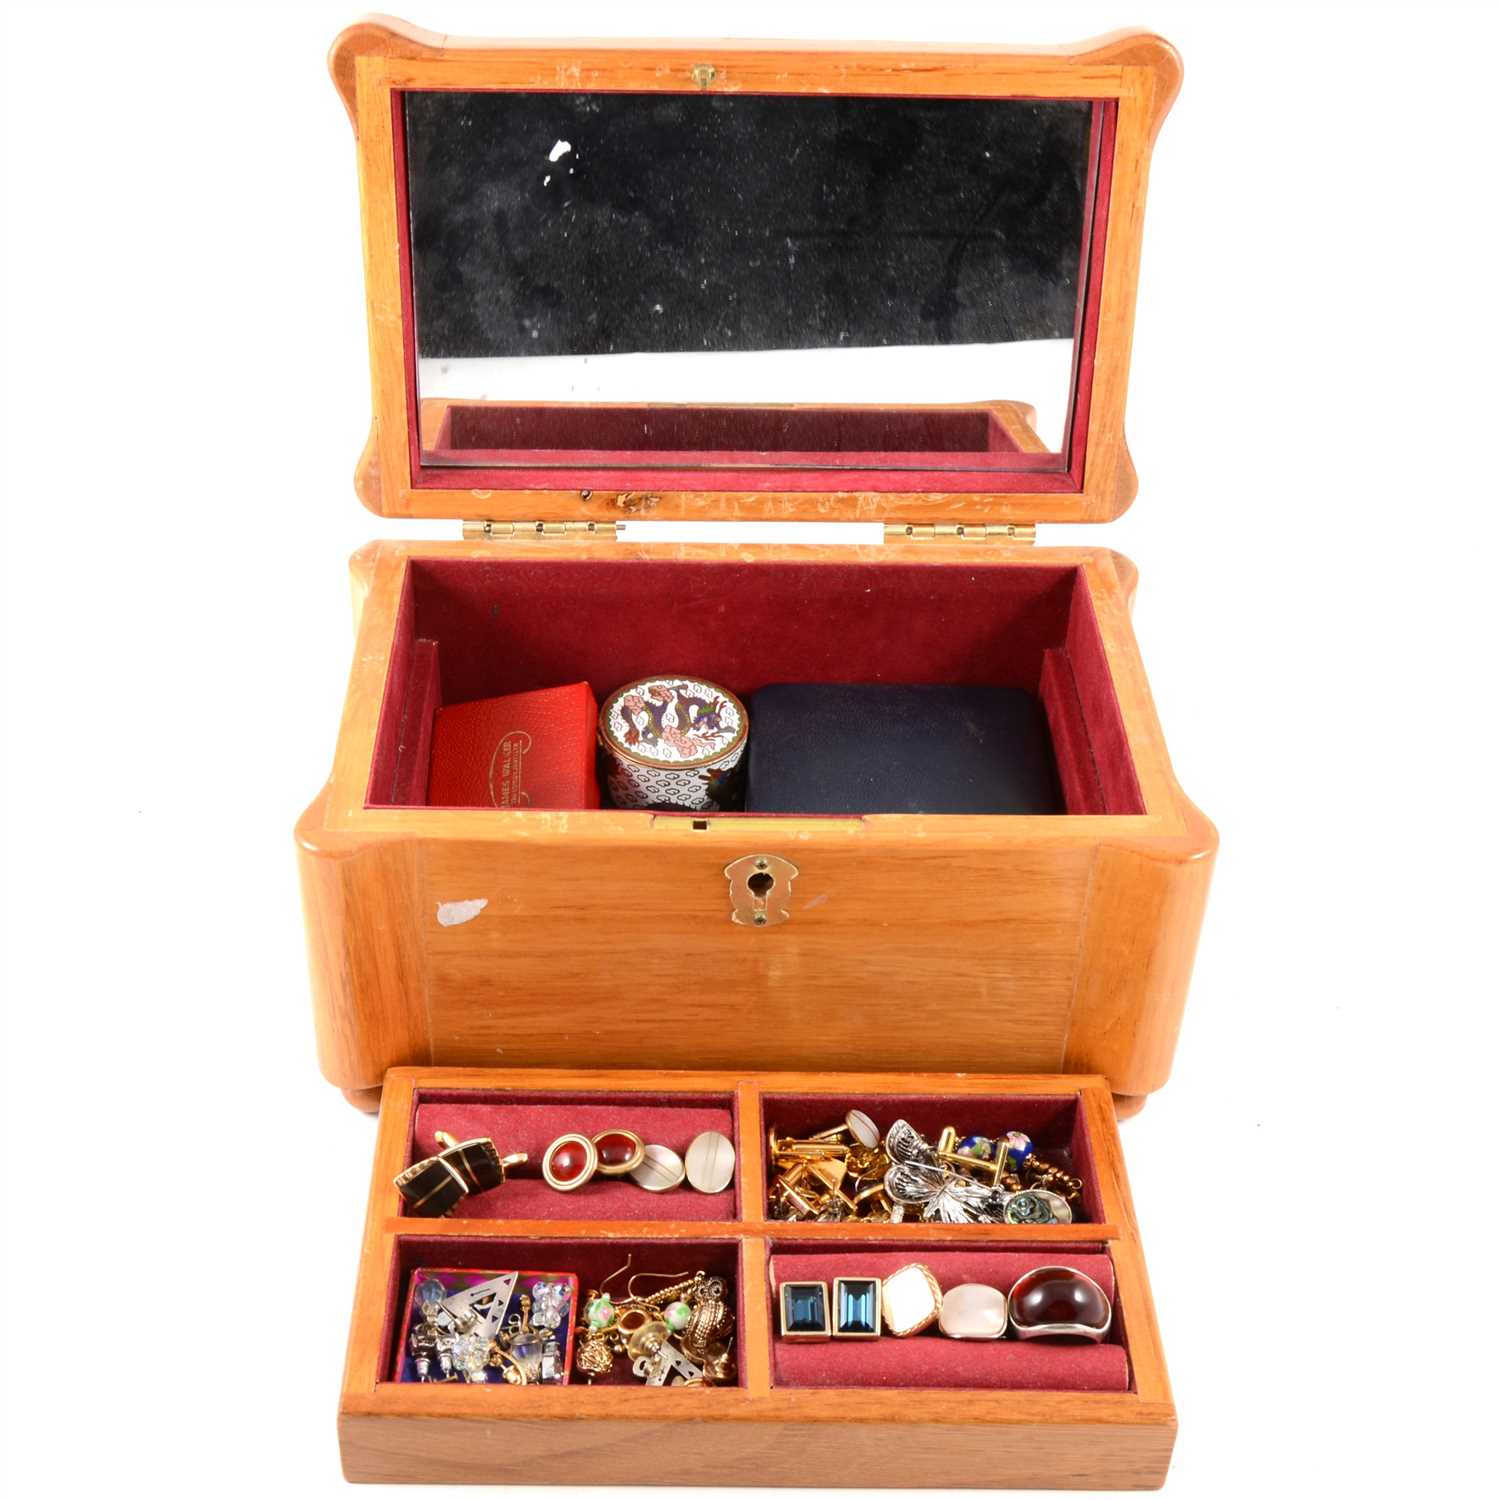 Lot 232 - A jewellery casket with vintage costume jewellery and cufflinks